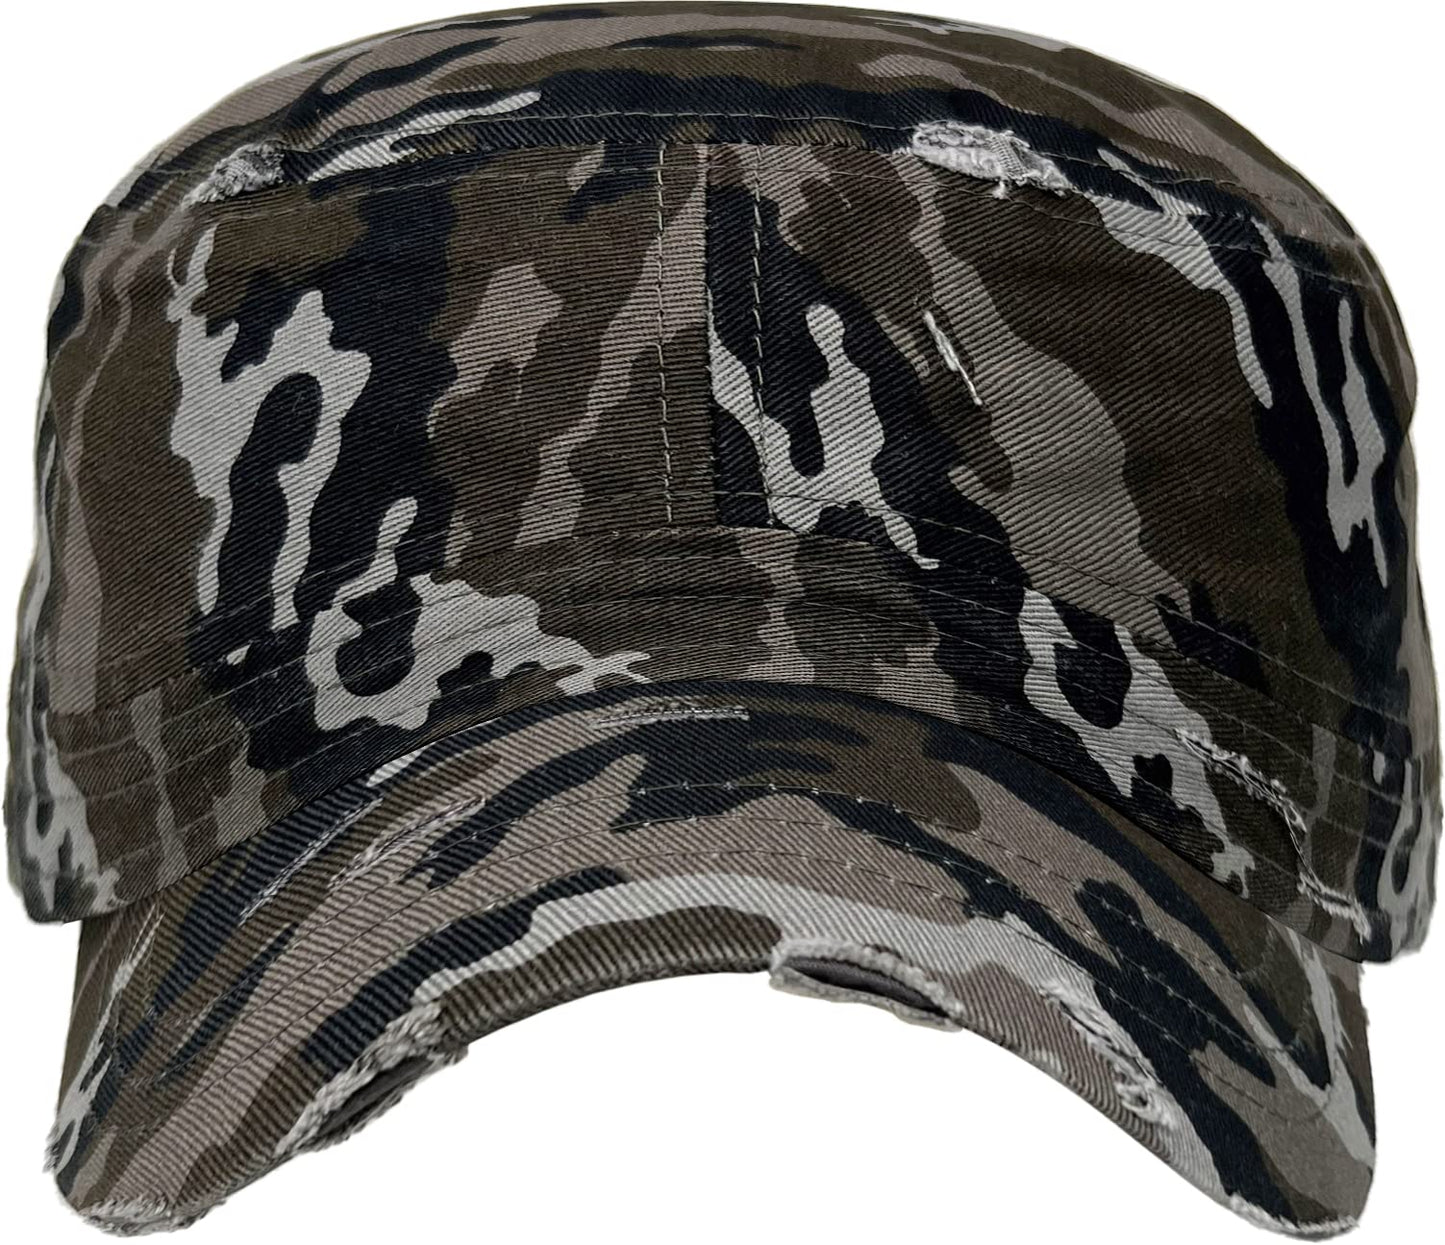 Distressed Cadet Hat by Funky Junque